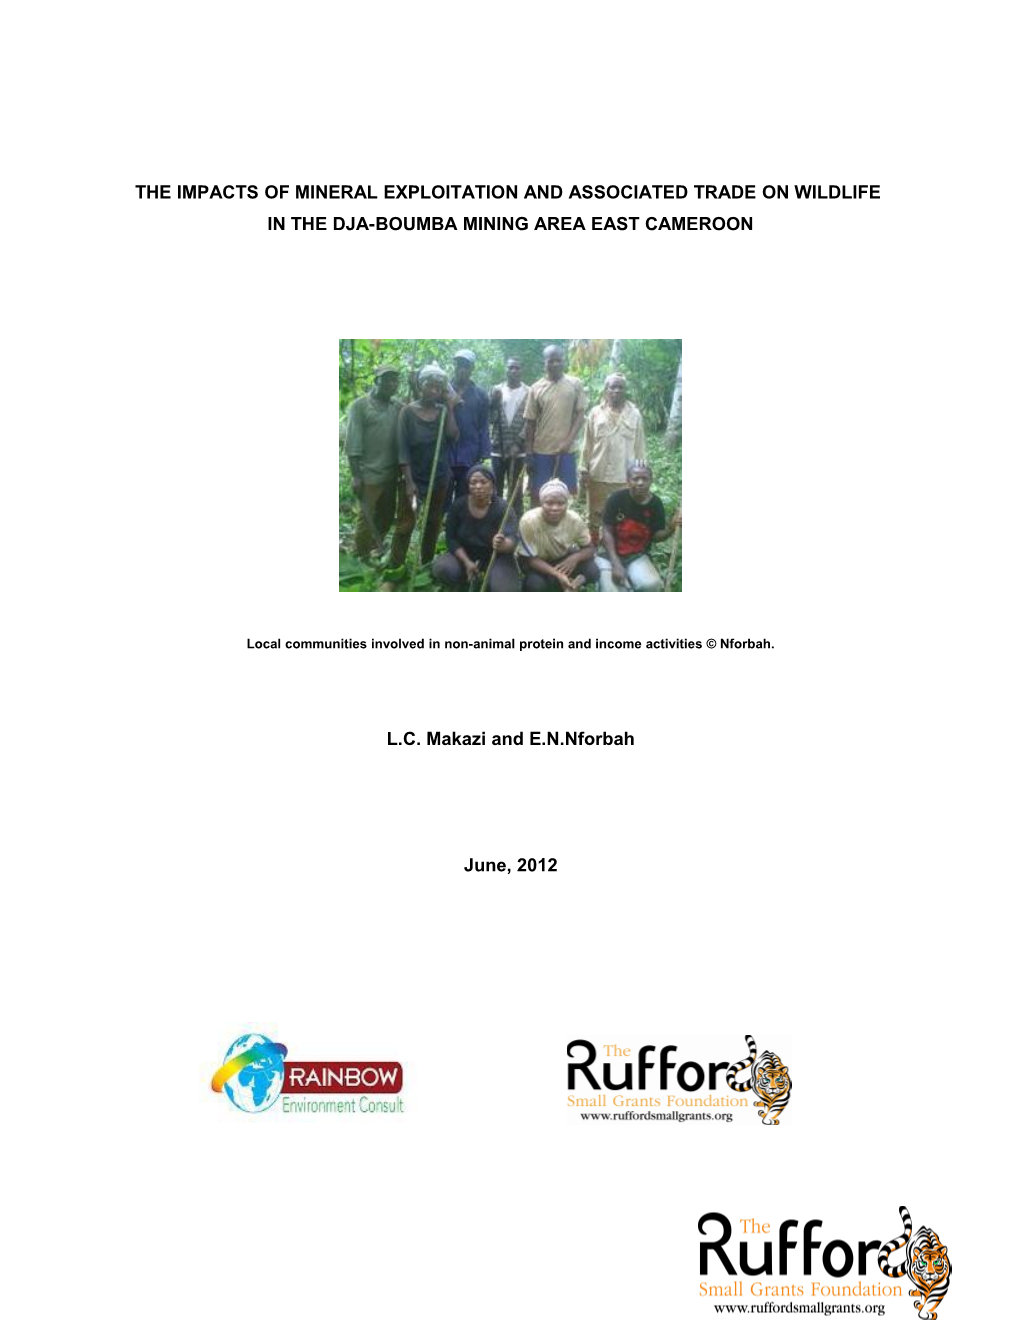 The Impacts of Mineral Exploitation and Associated Trade on Wildlife